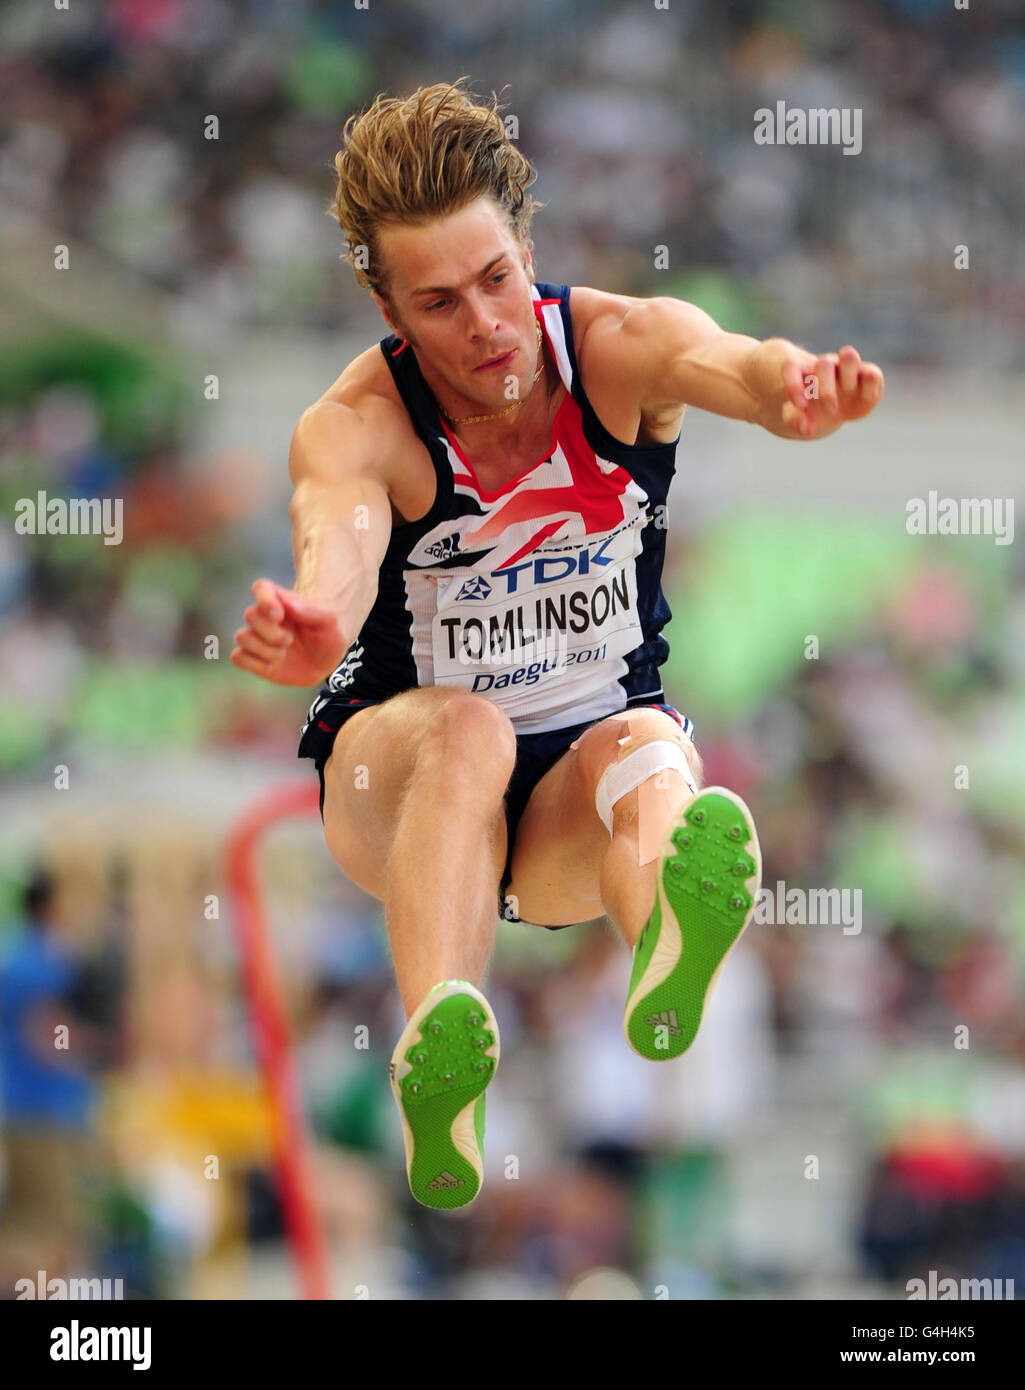 Great Britain's Chris Tomlinson qualifying for the Men's Long Jump during Day Six of the IAAF World Athletics Championships at the Daegu Stadium in Daegu, South Korea. Stock Photo